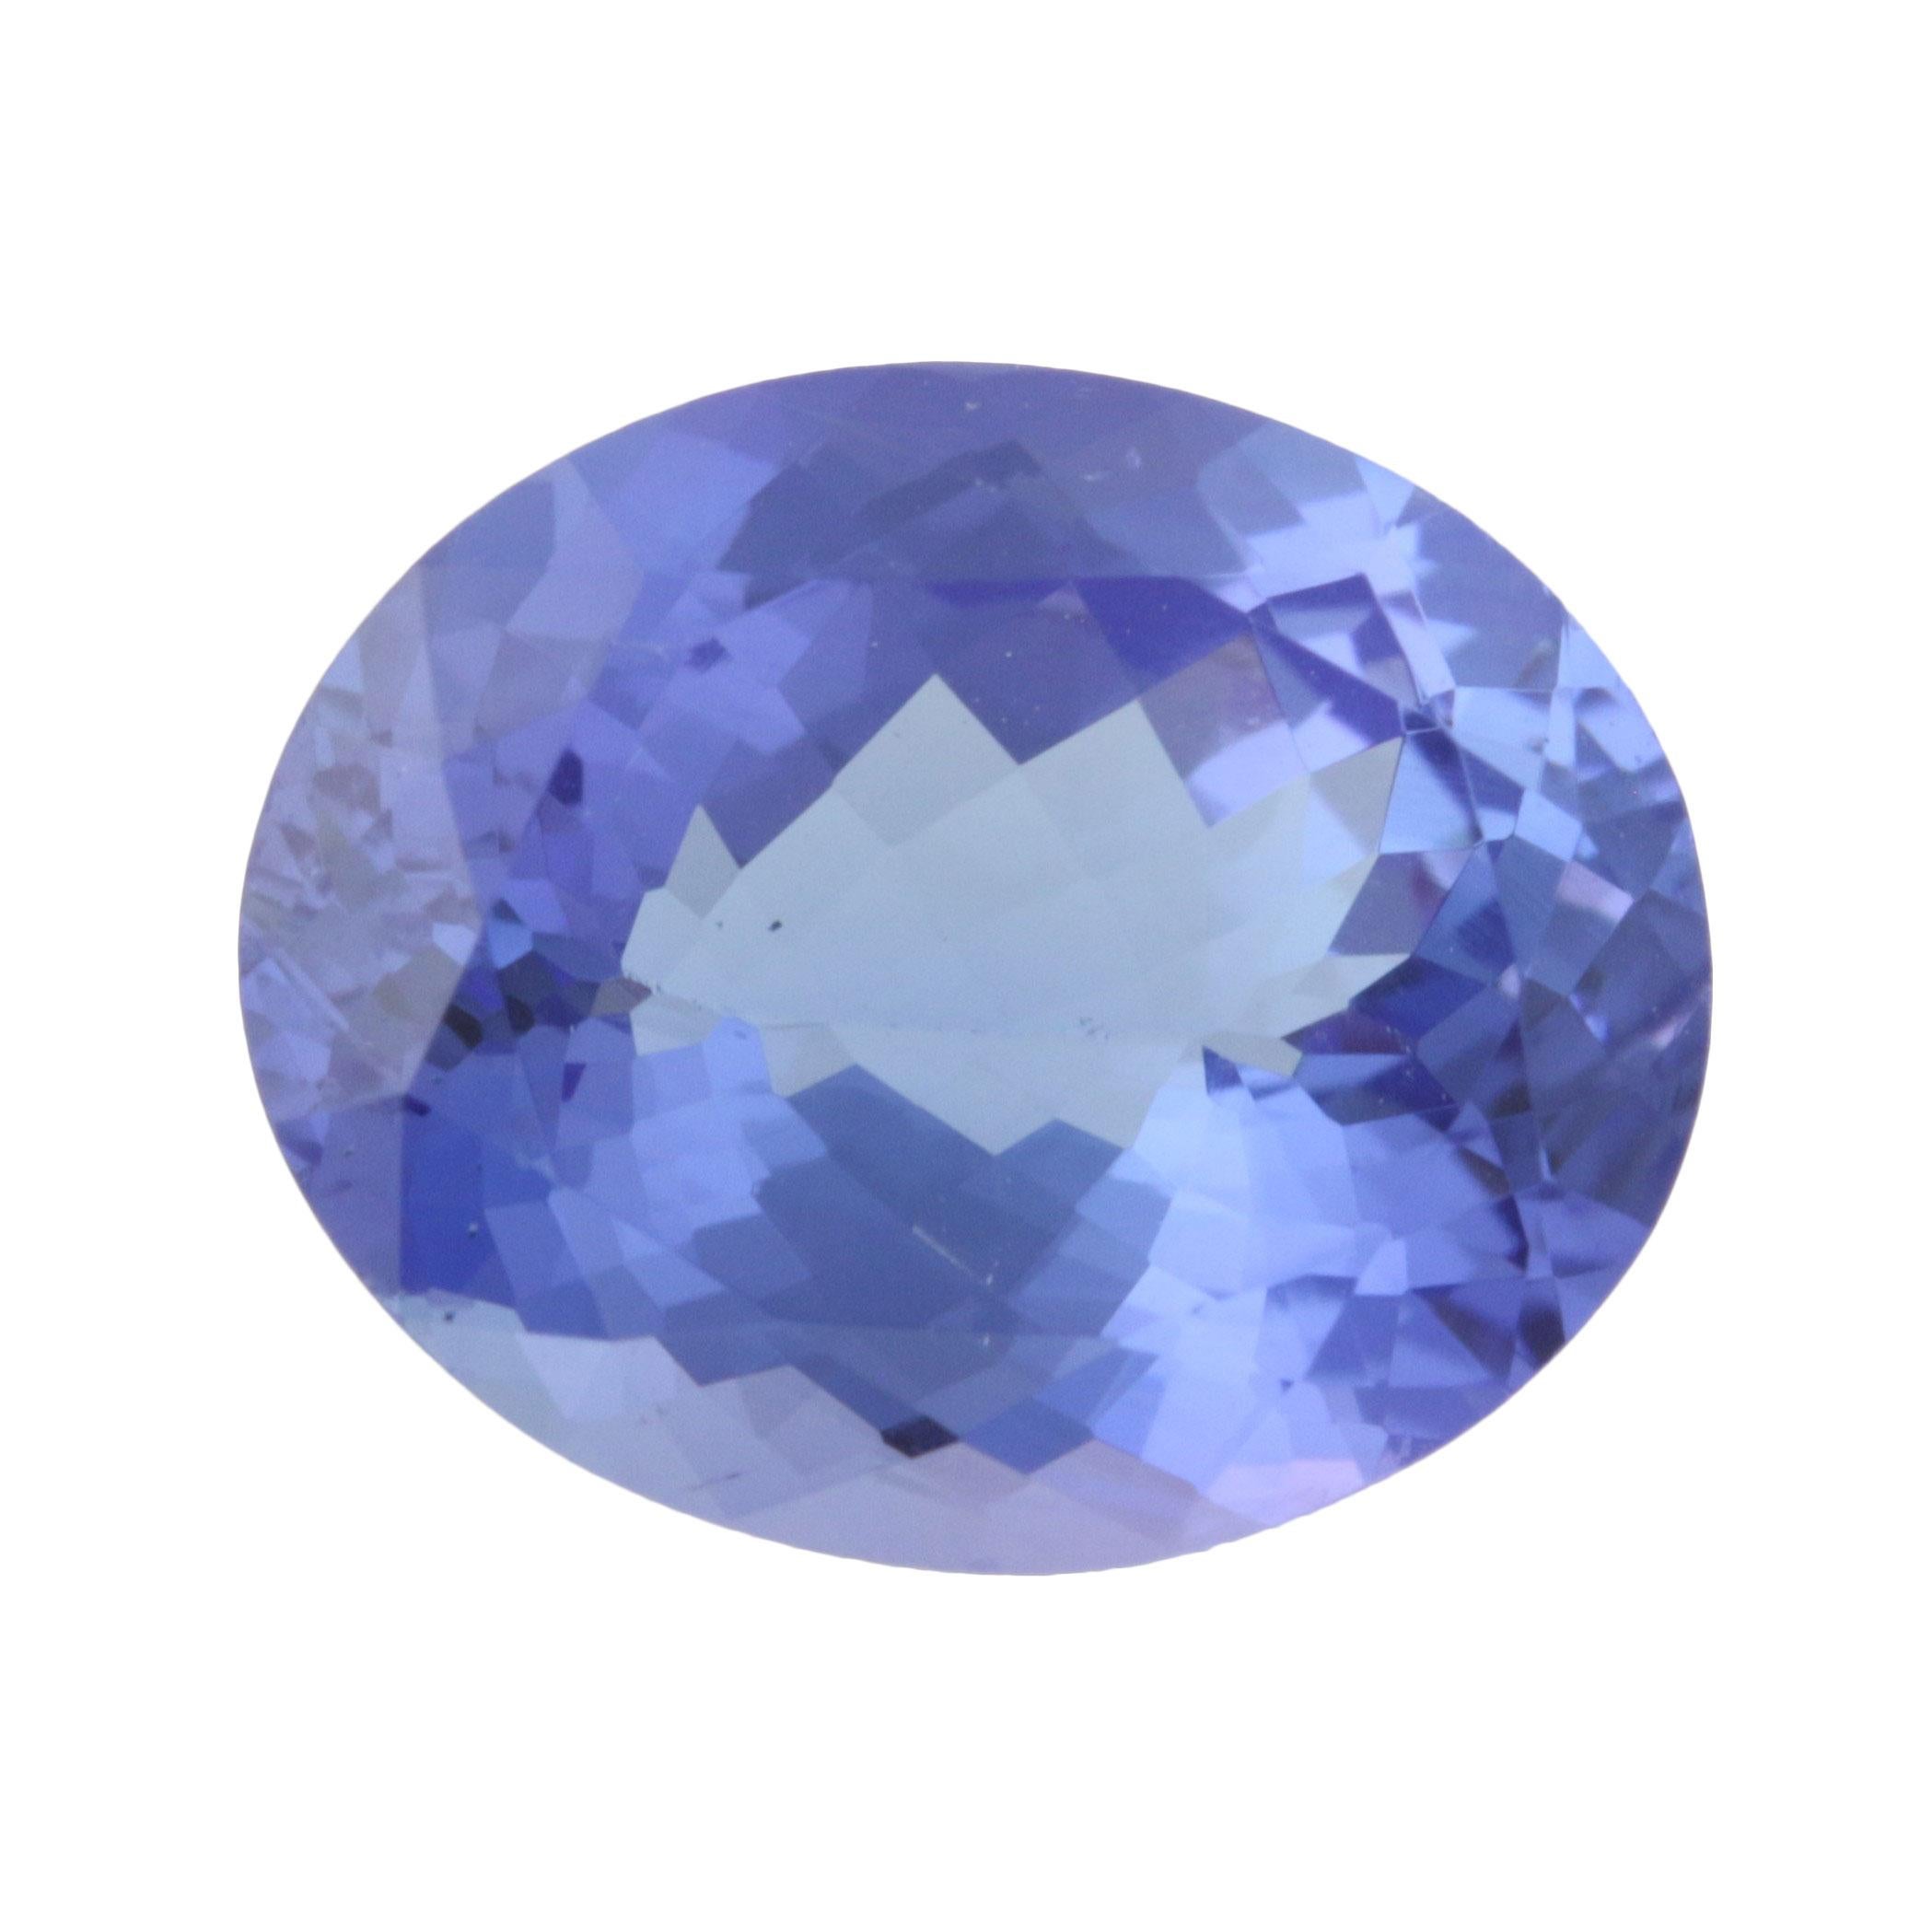 Women's or Men's 3.66 Carat Tanzanite Gemstone, Oval Cut Loose Solitaire For Sale